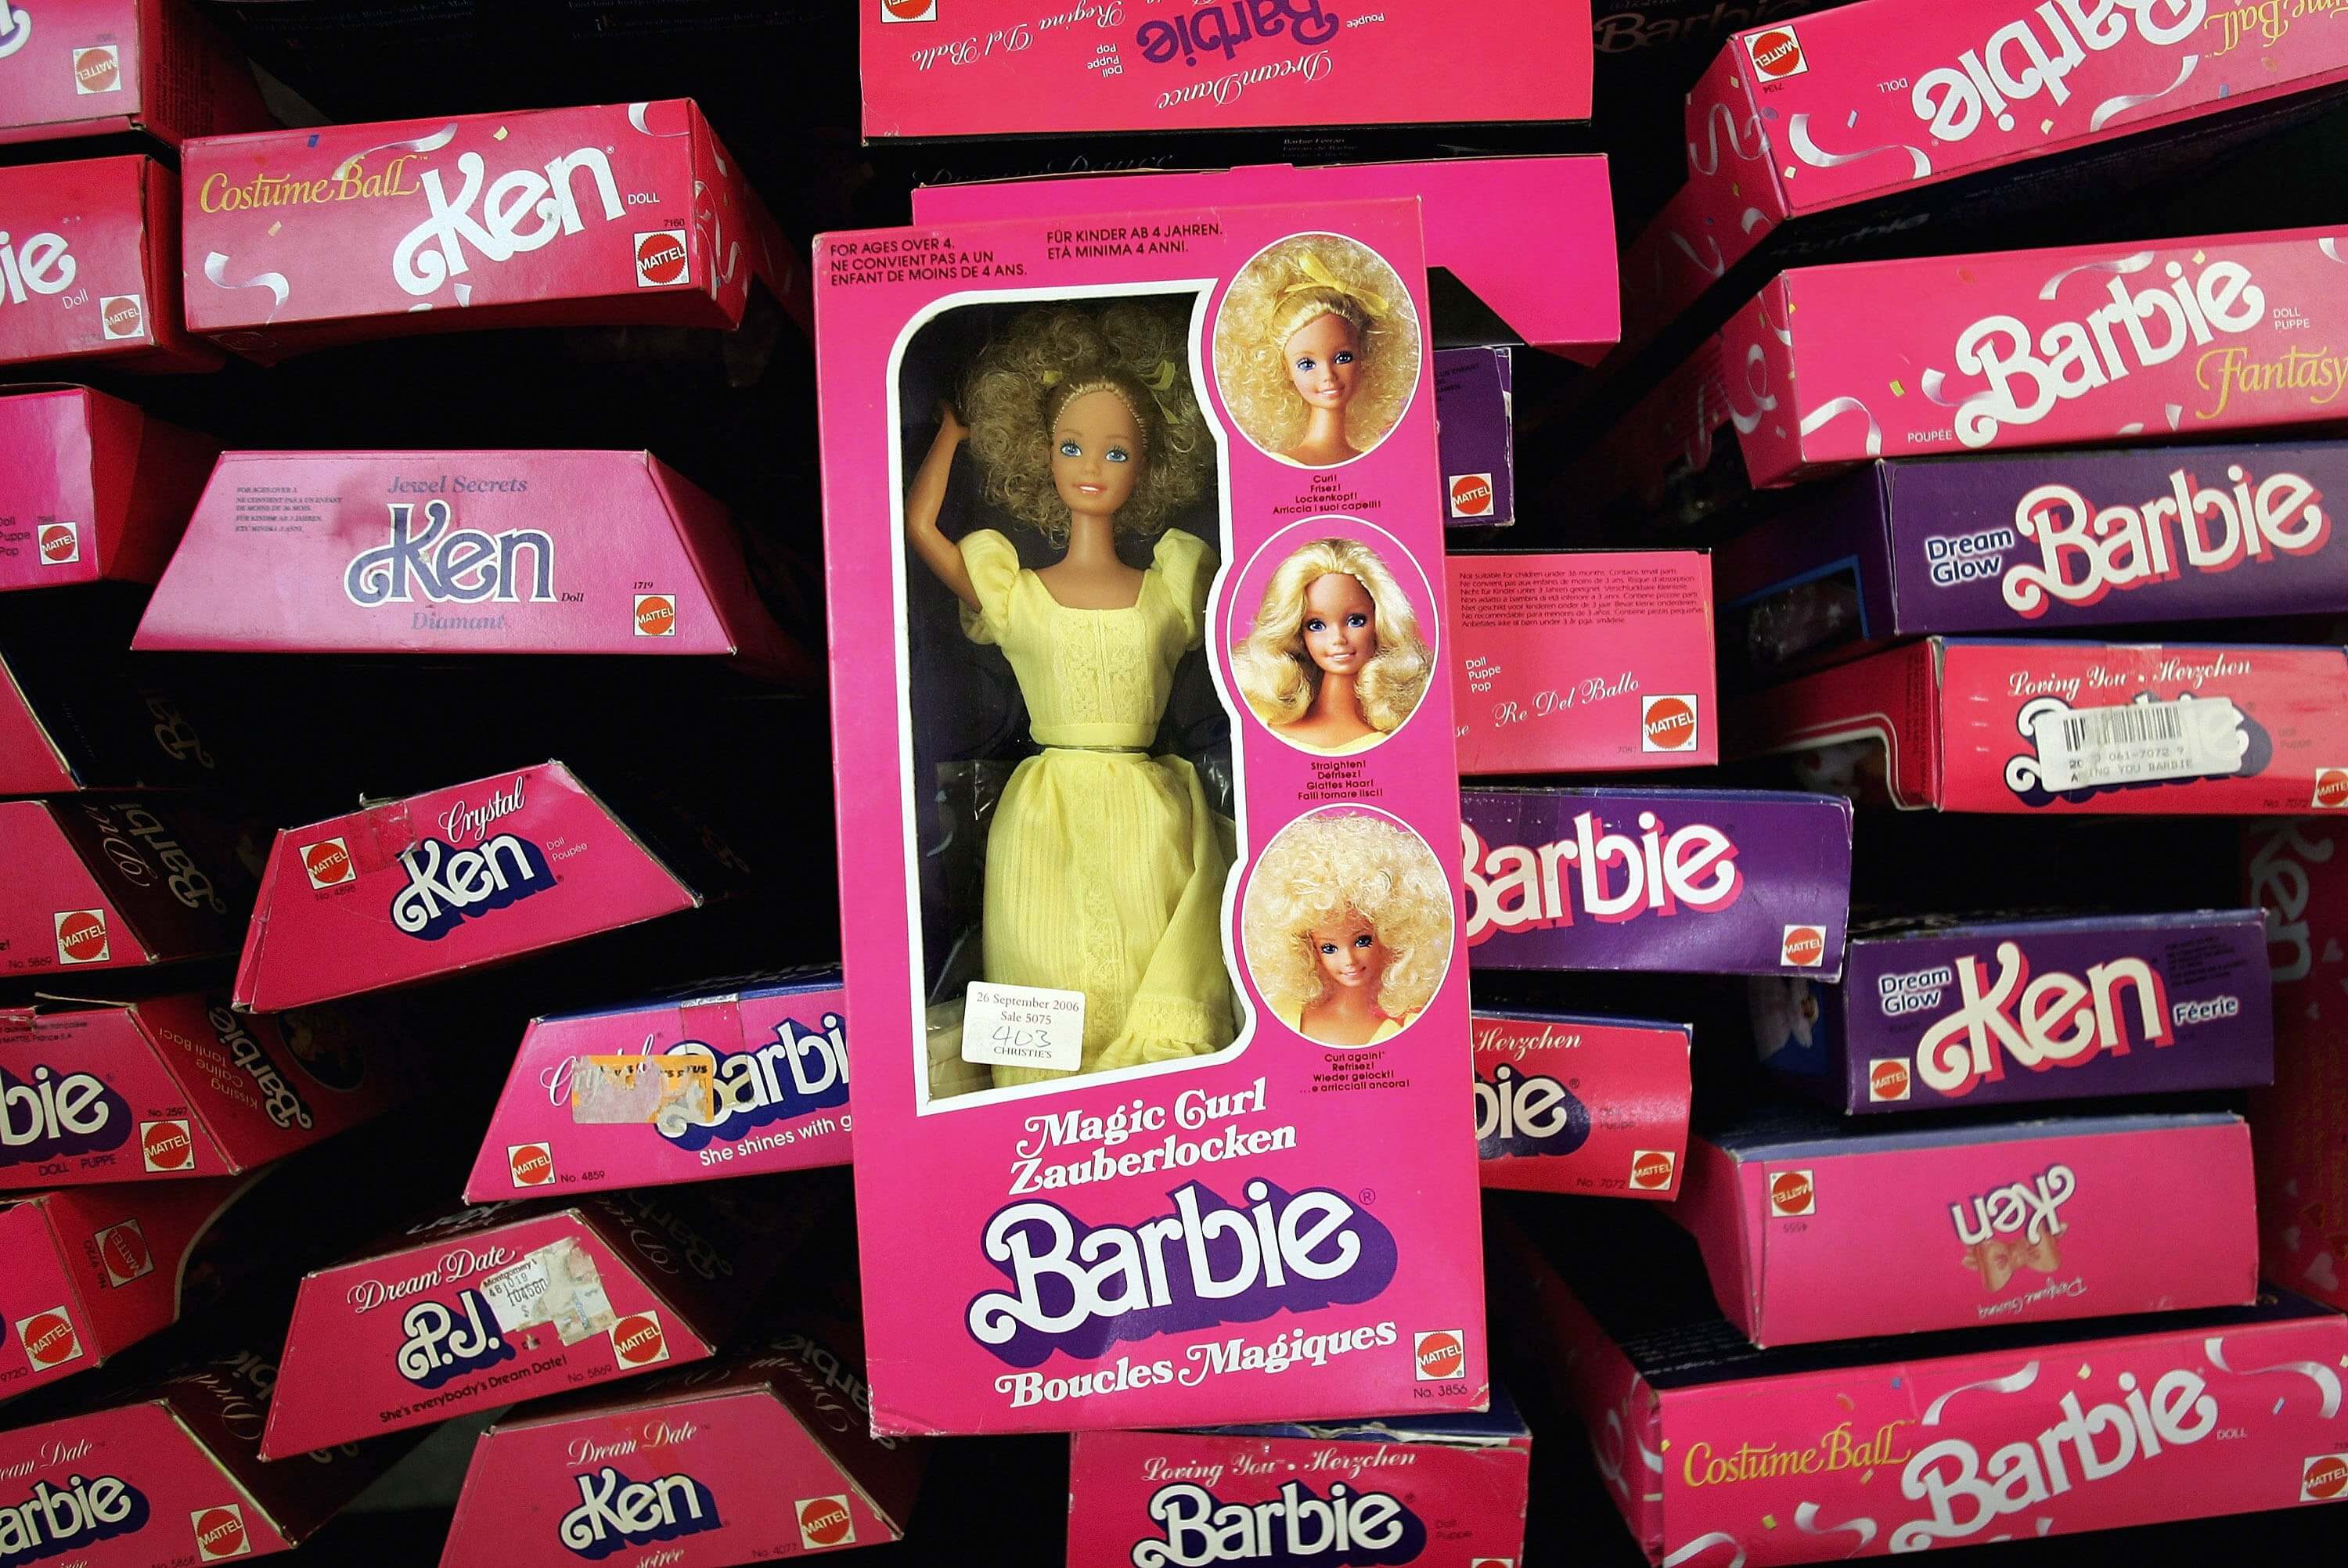 Barbies, the subject of Aqua's "Barbie Girl," in pink boxes